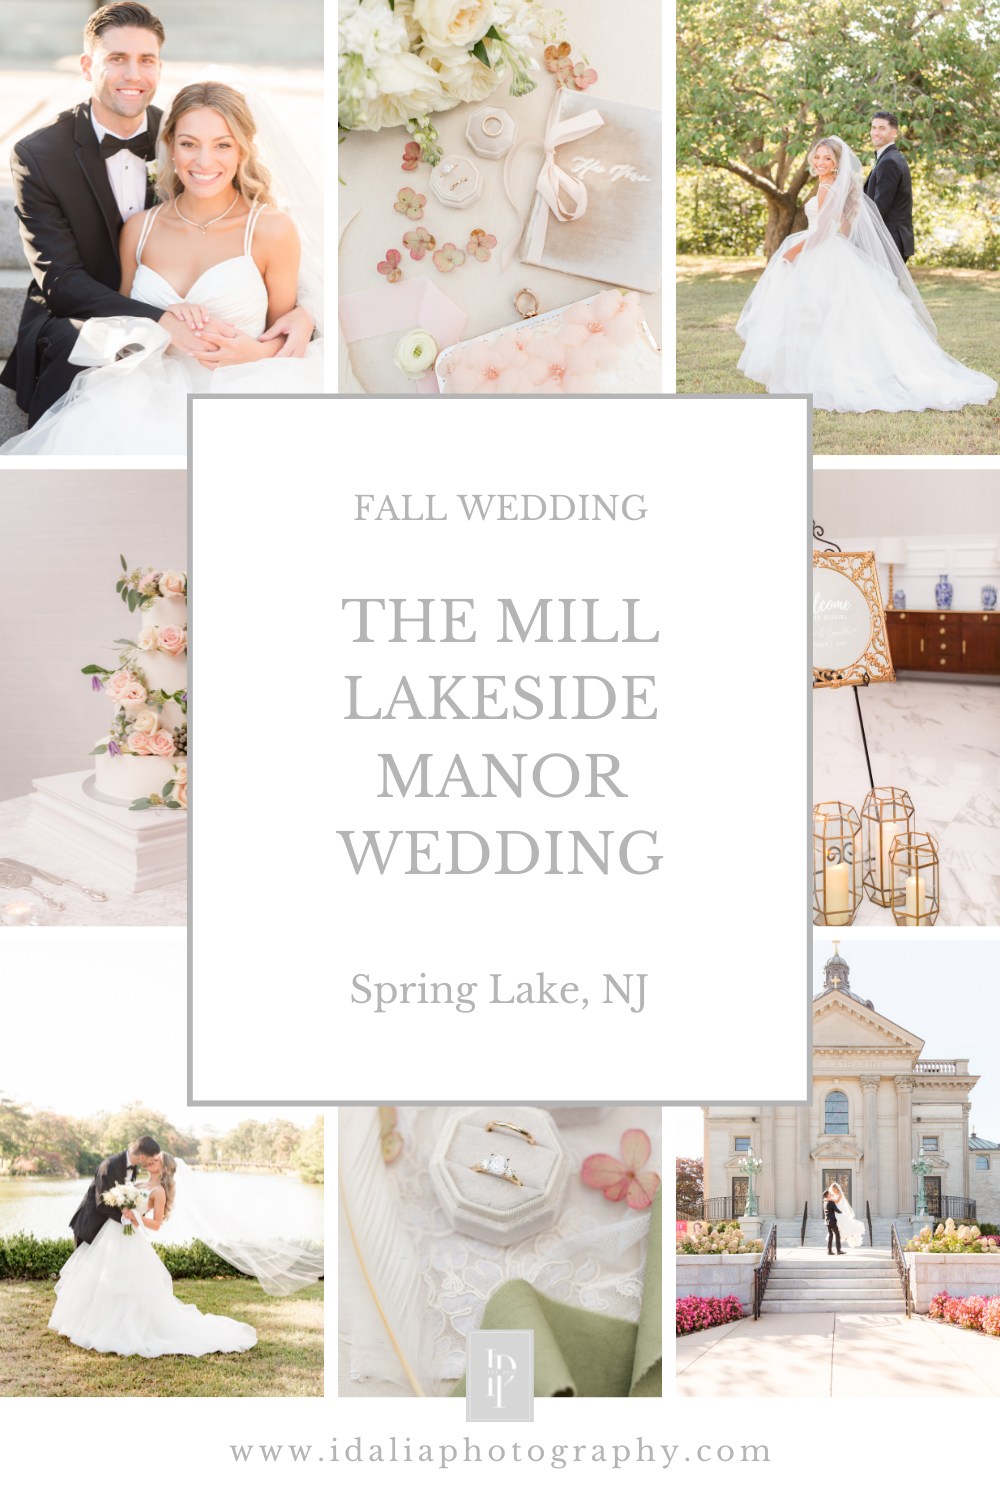 The Mill Lakeside Manor Wedding day in the fall photographed by Spring Lake, NJ wedding photographer Idalia Photography